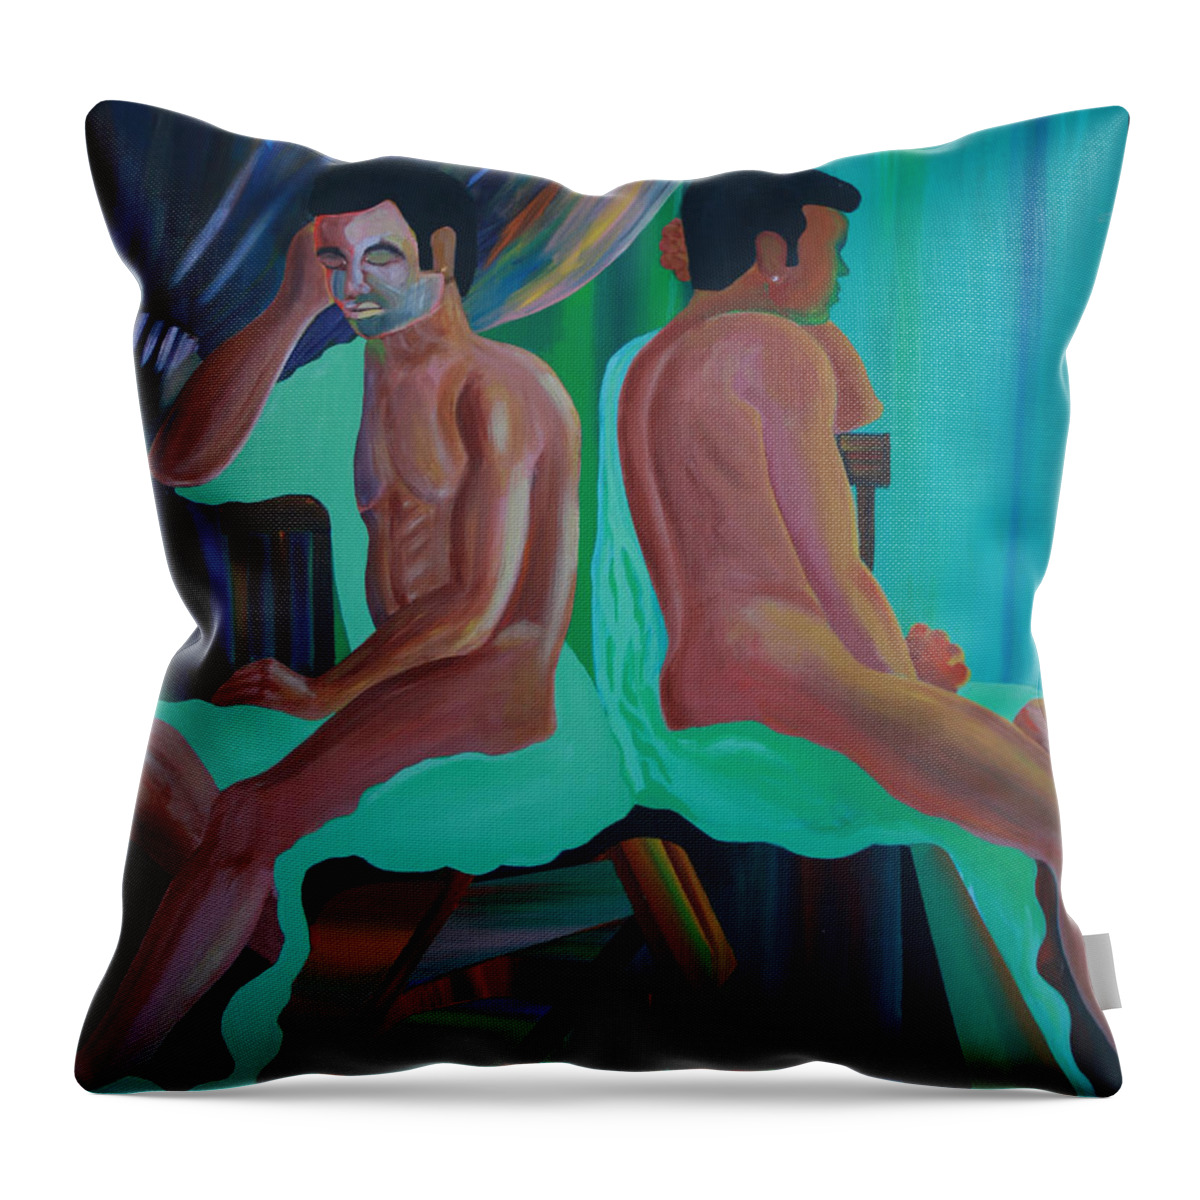 Like Poles Throw Pillow featuring the painting Like Poles by Obi-Tabot Tabe